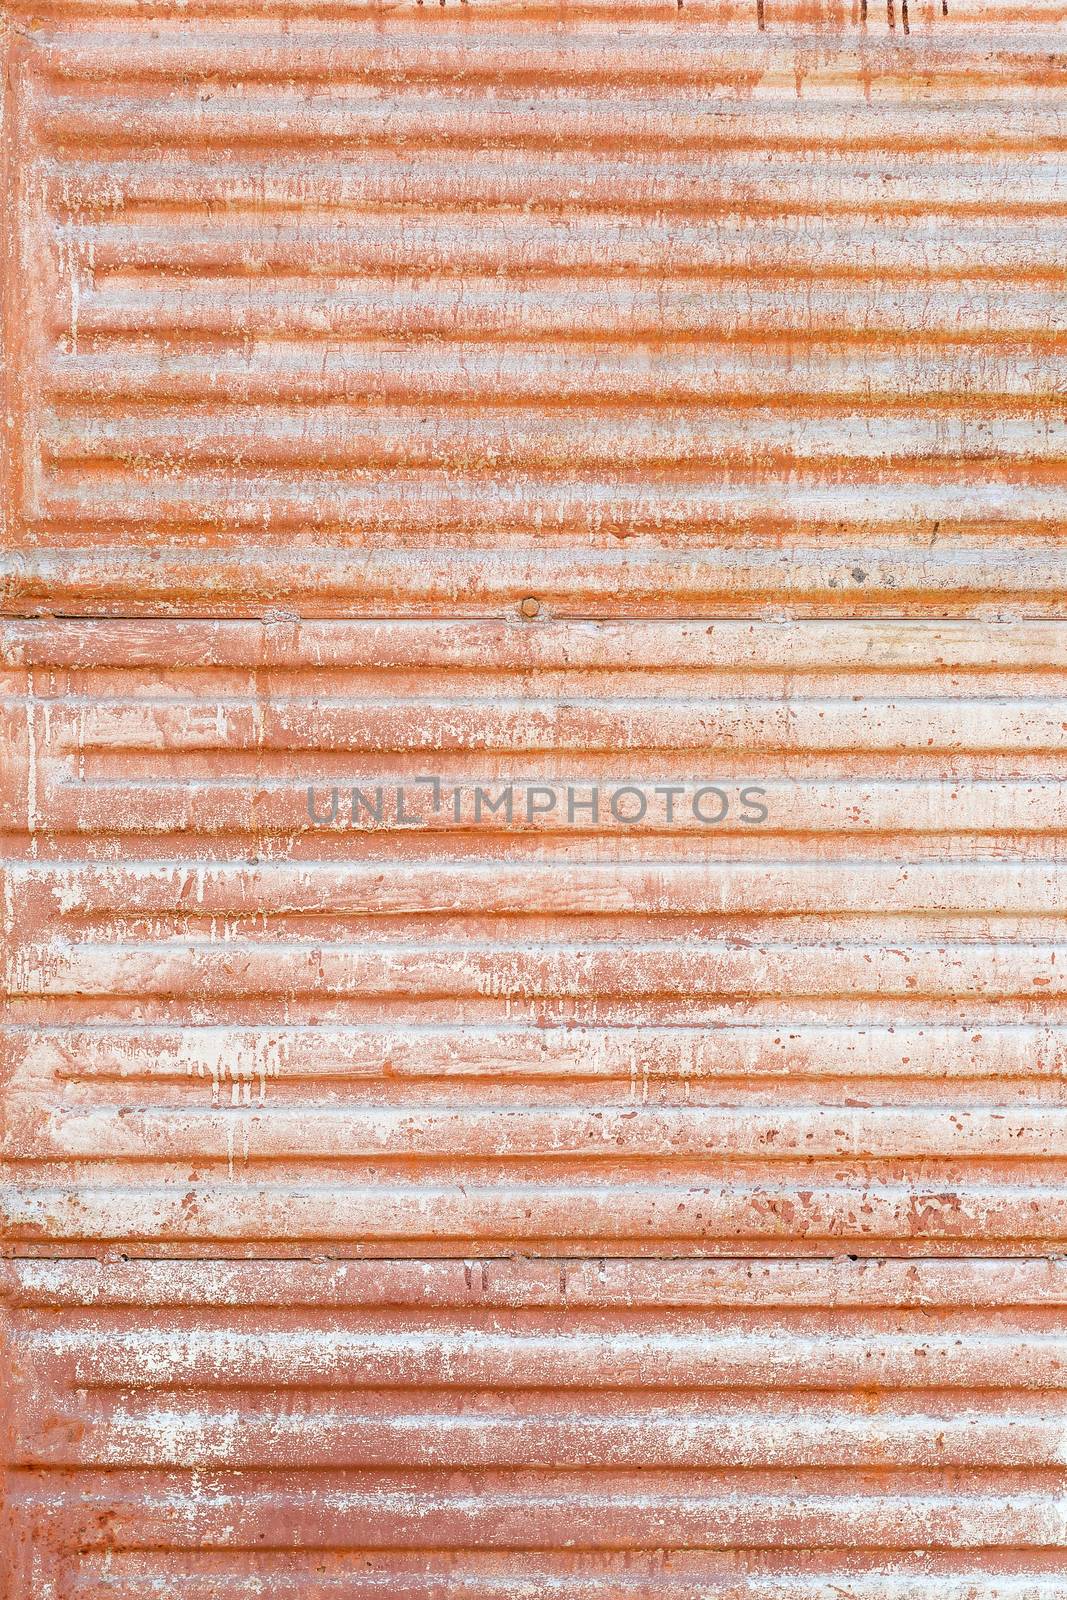 old grunge rusty zinc wall for textured background